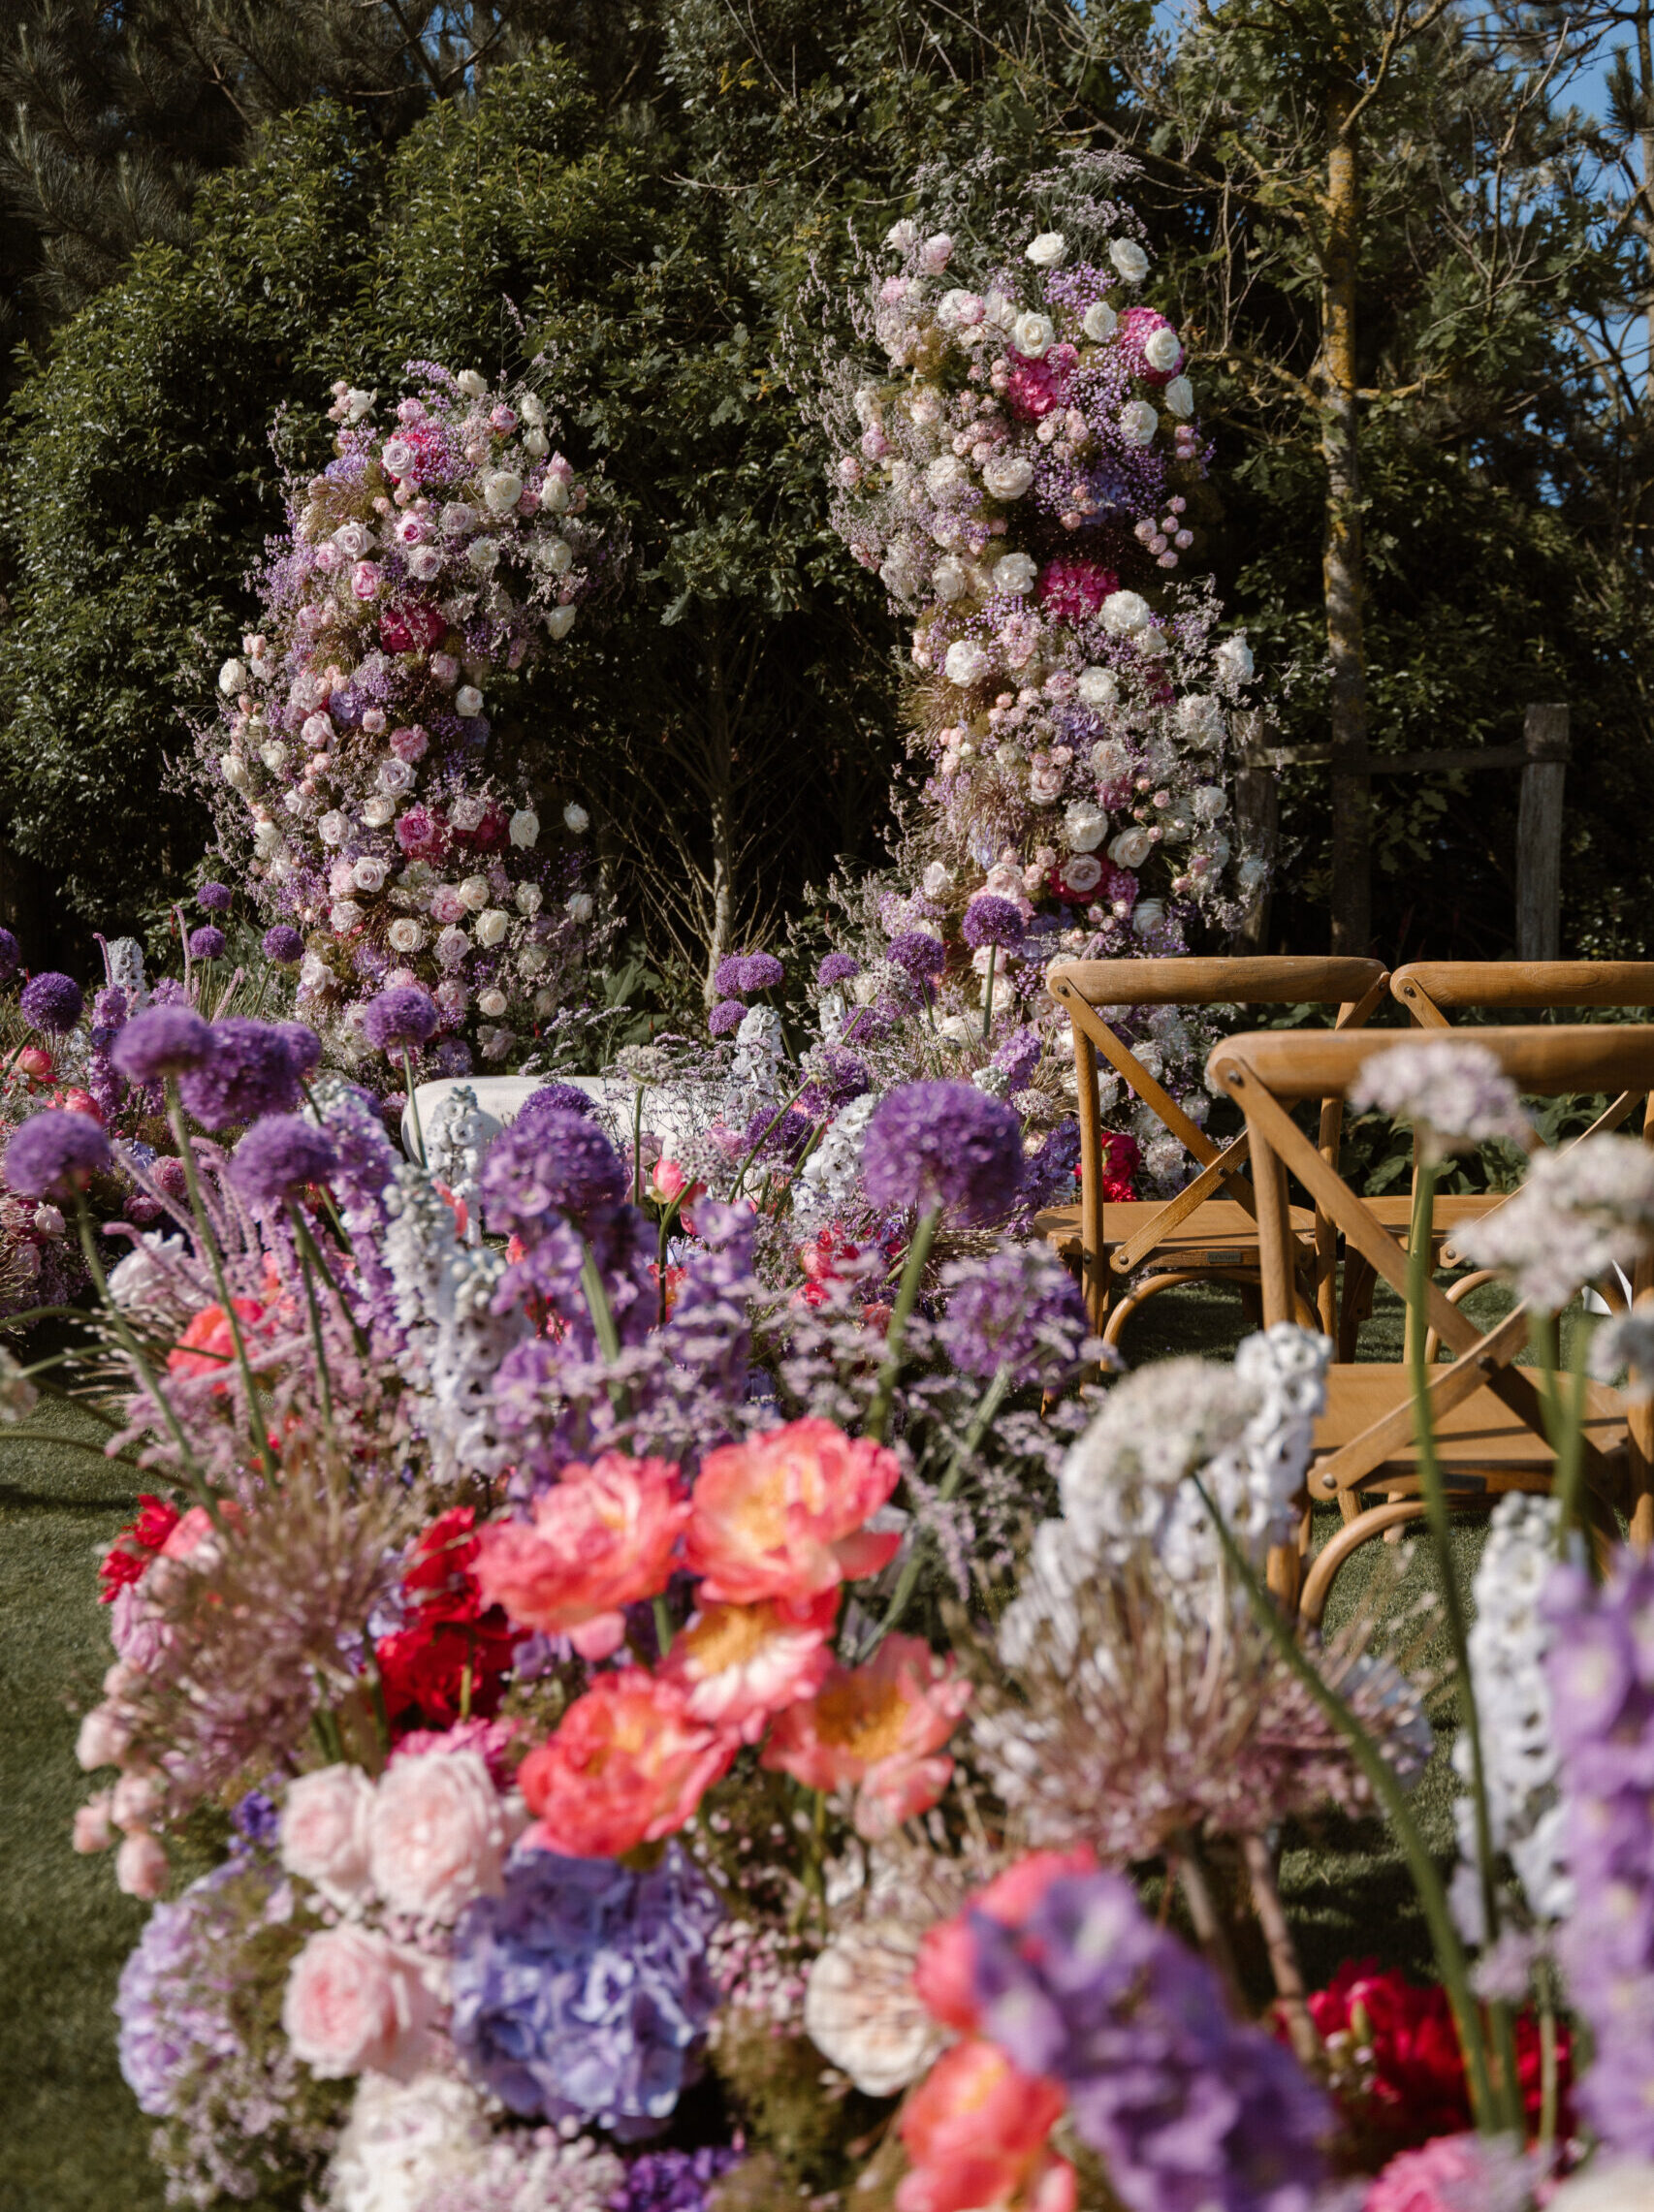 Alliums and delphiniums will make your wedding perfect!